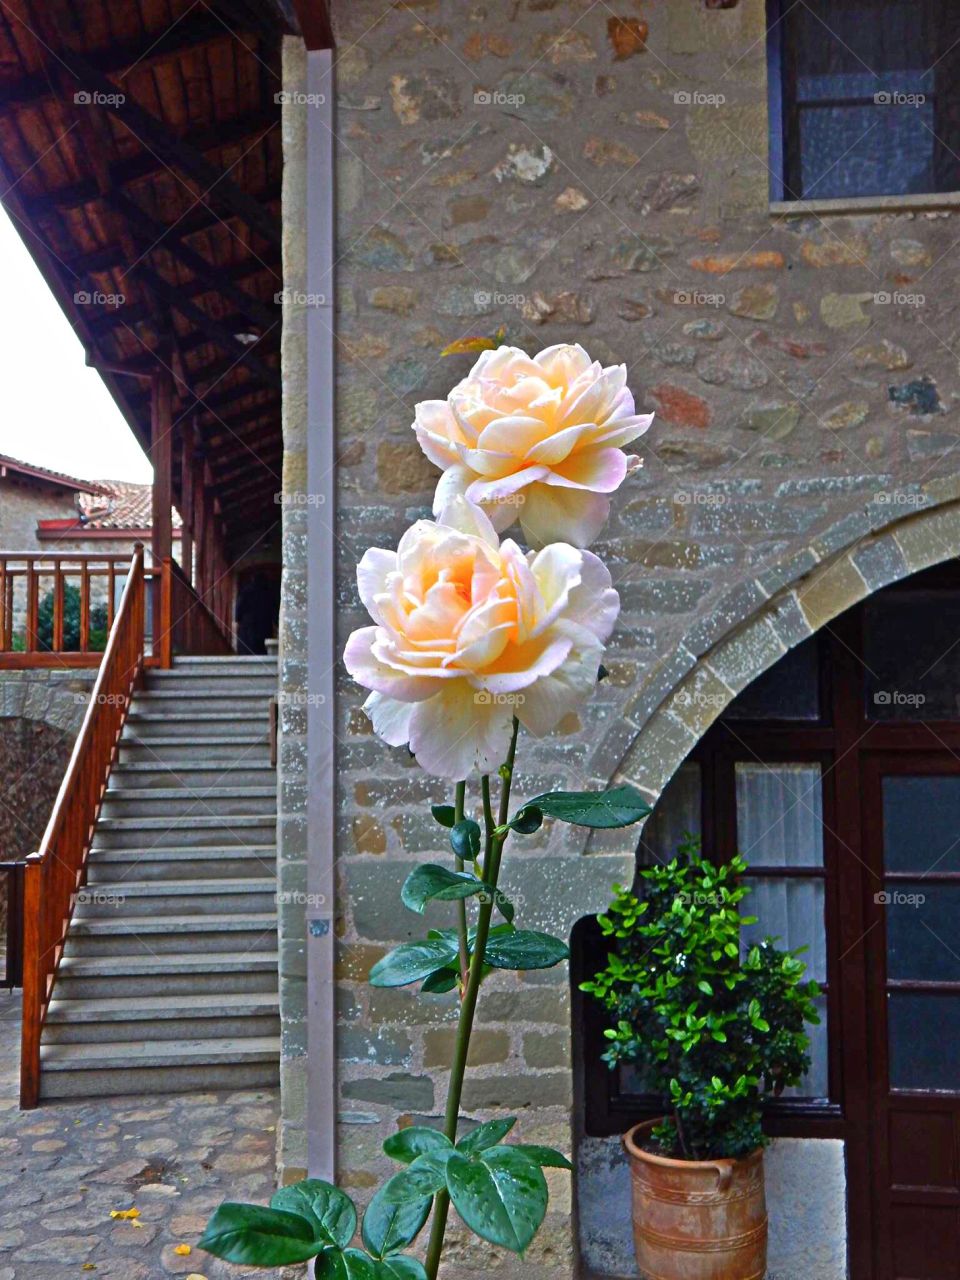 Big, pale pink and yellow roses in the courtyard of a monastery in Greece.